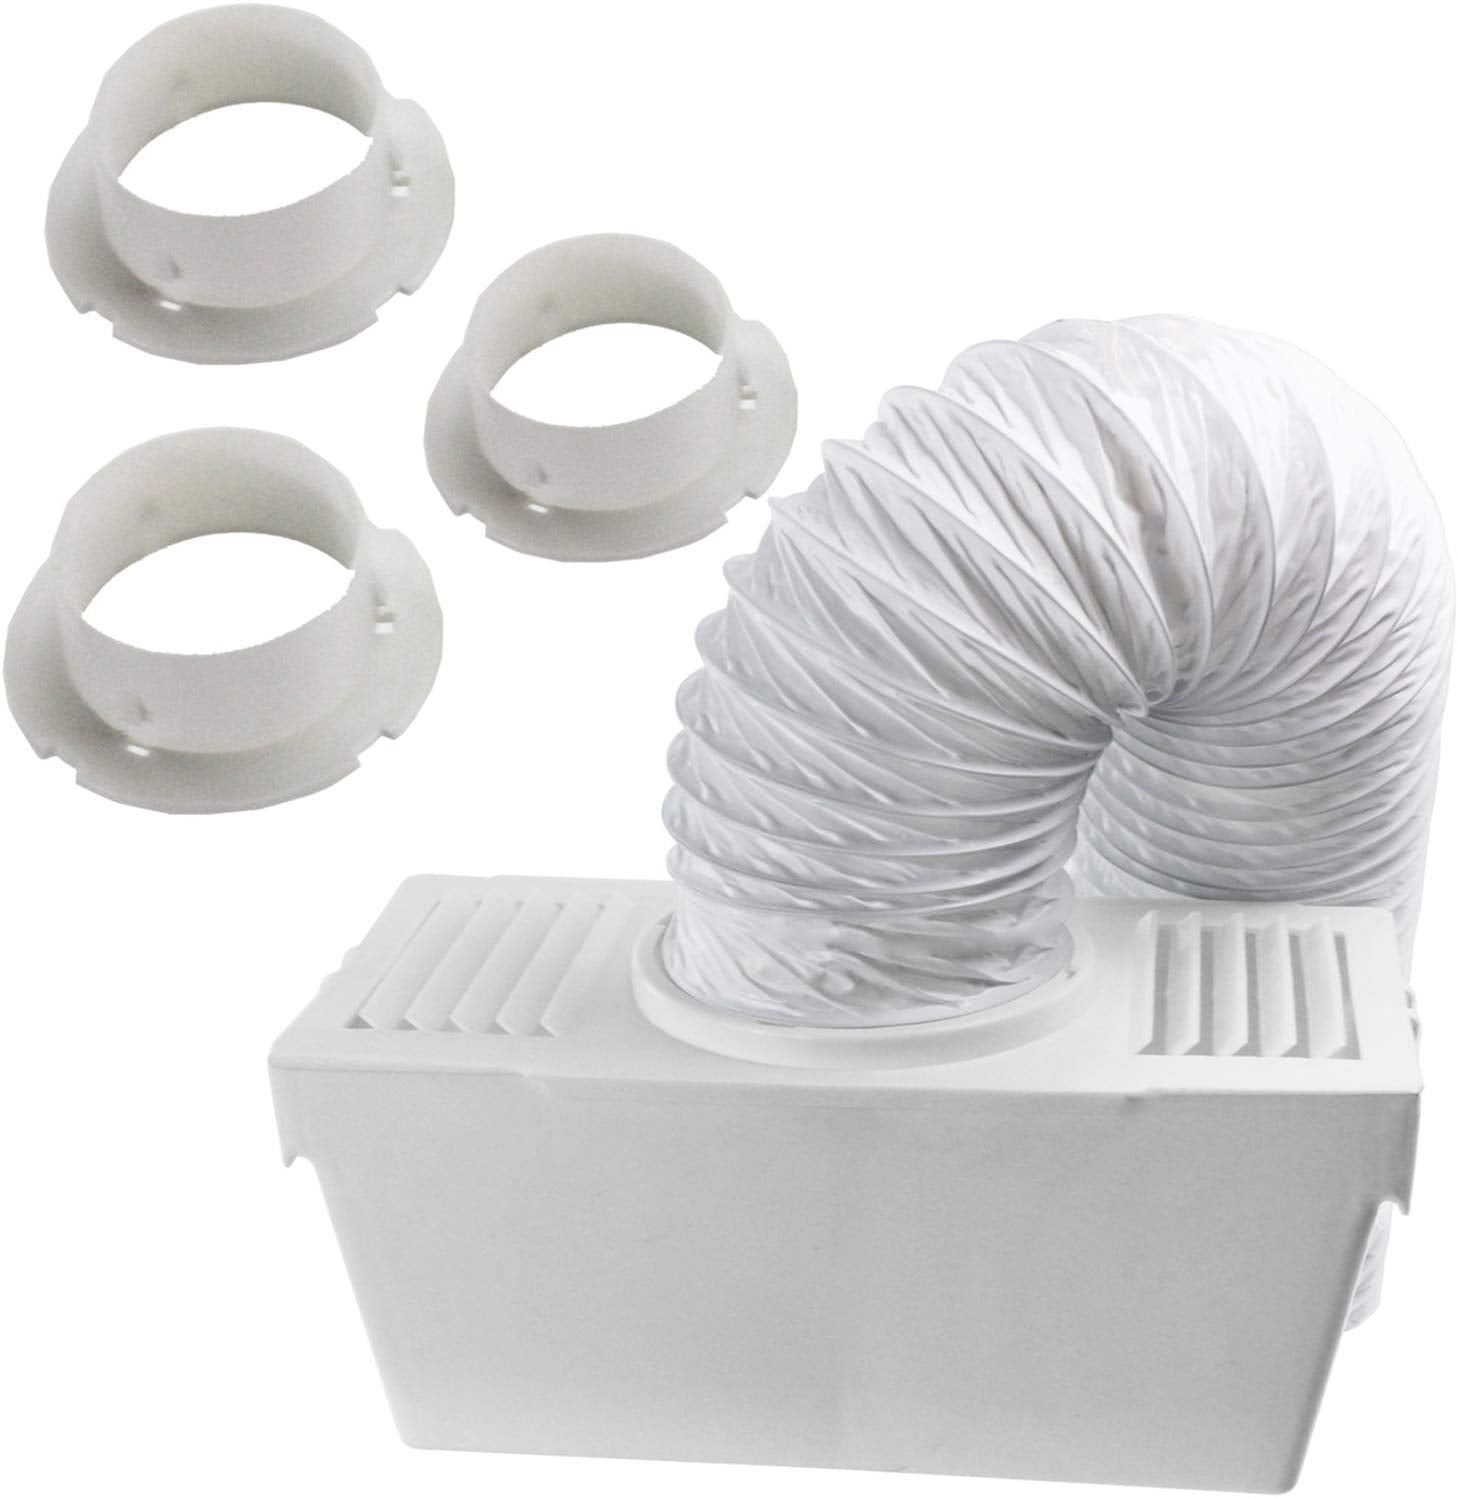 Vent Hose Condenser Kit with 3 x Adapters for Electrolux Tumble Dryer (1.2m)